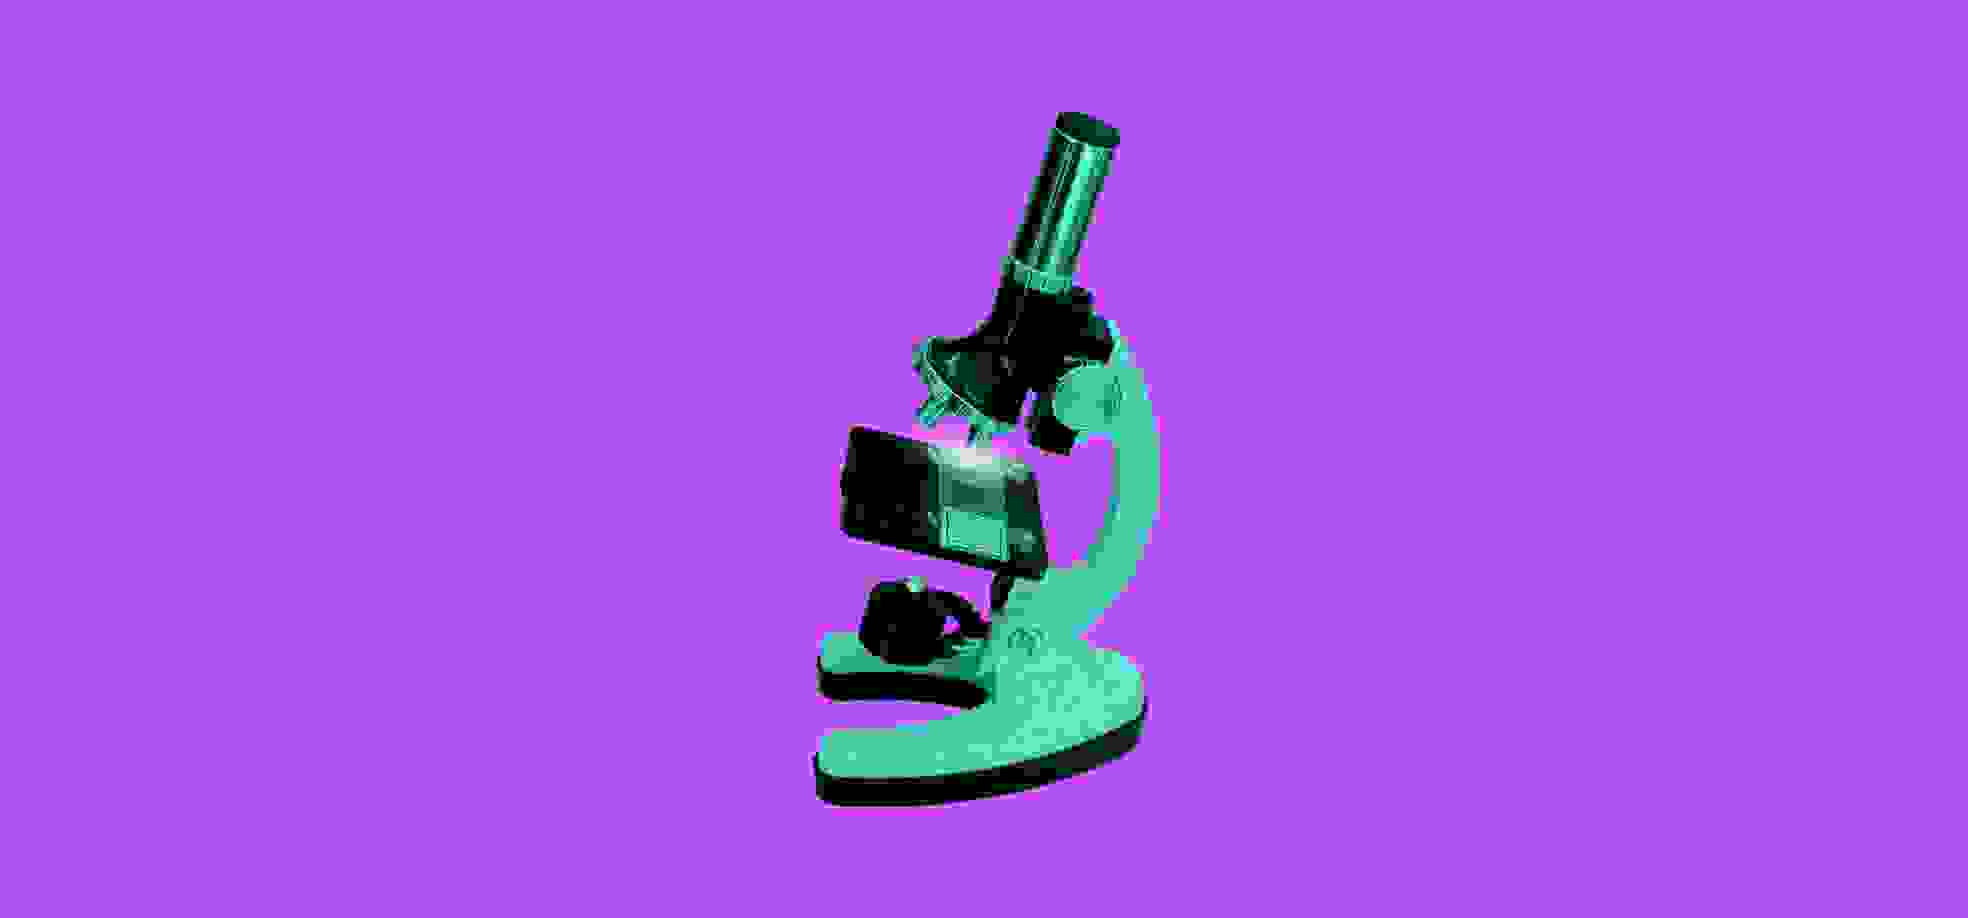 a green telescope illustration on a purple background representing software testing